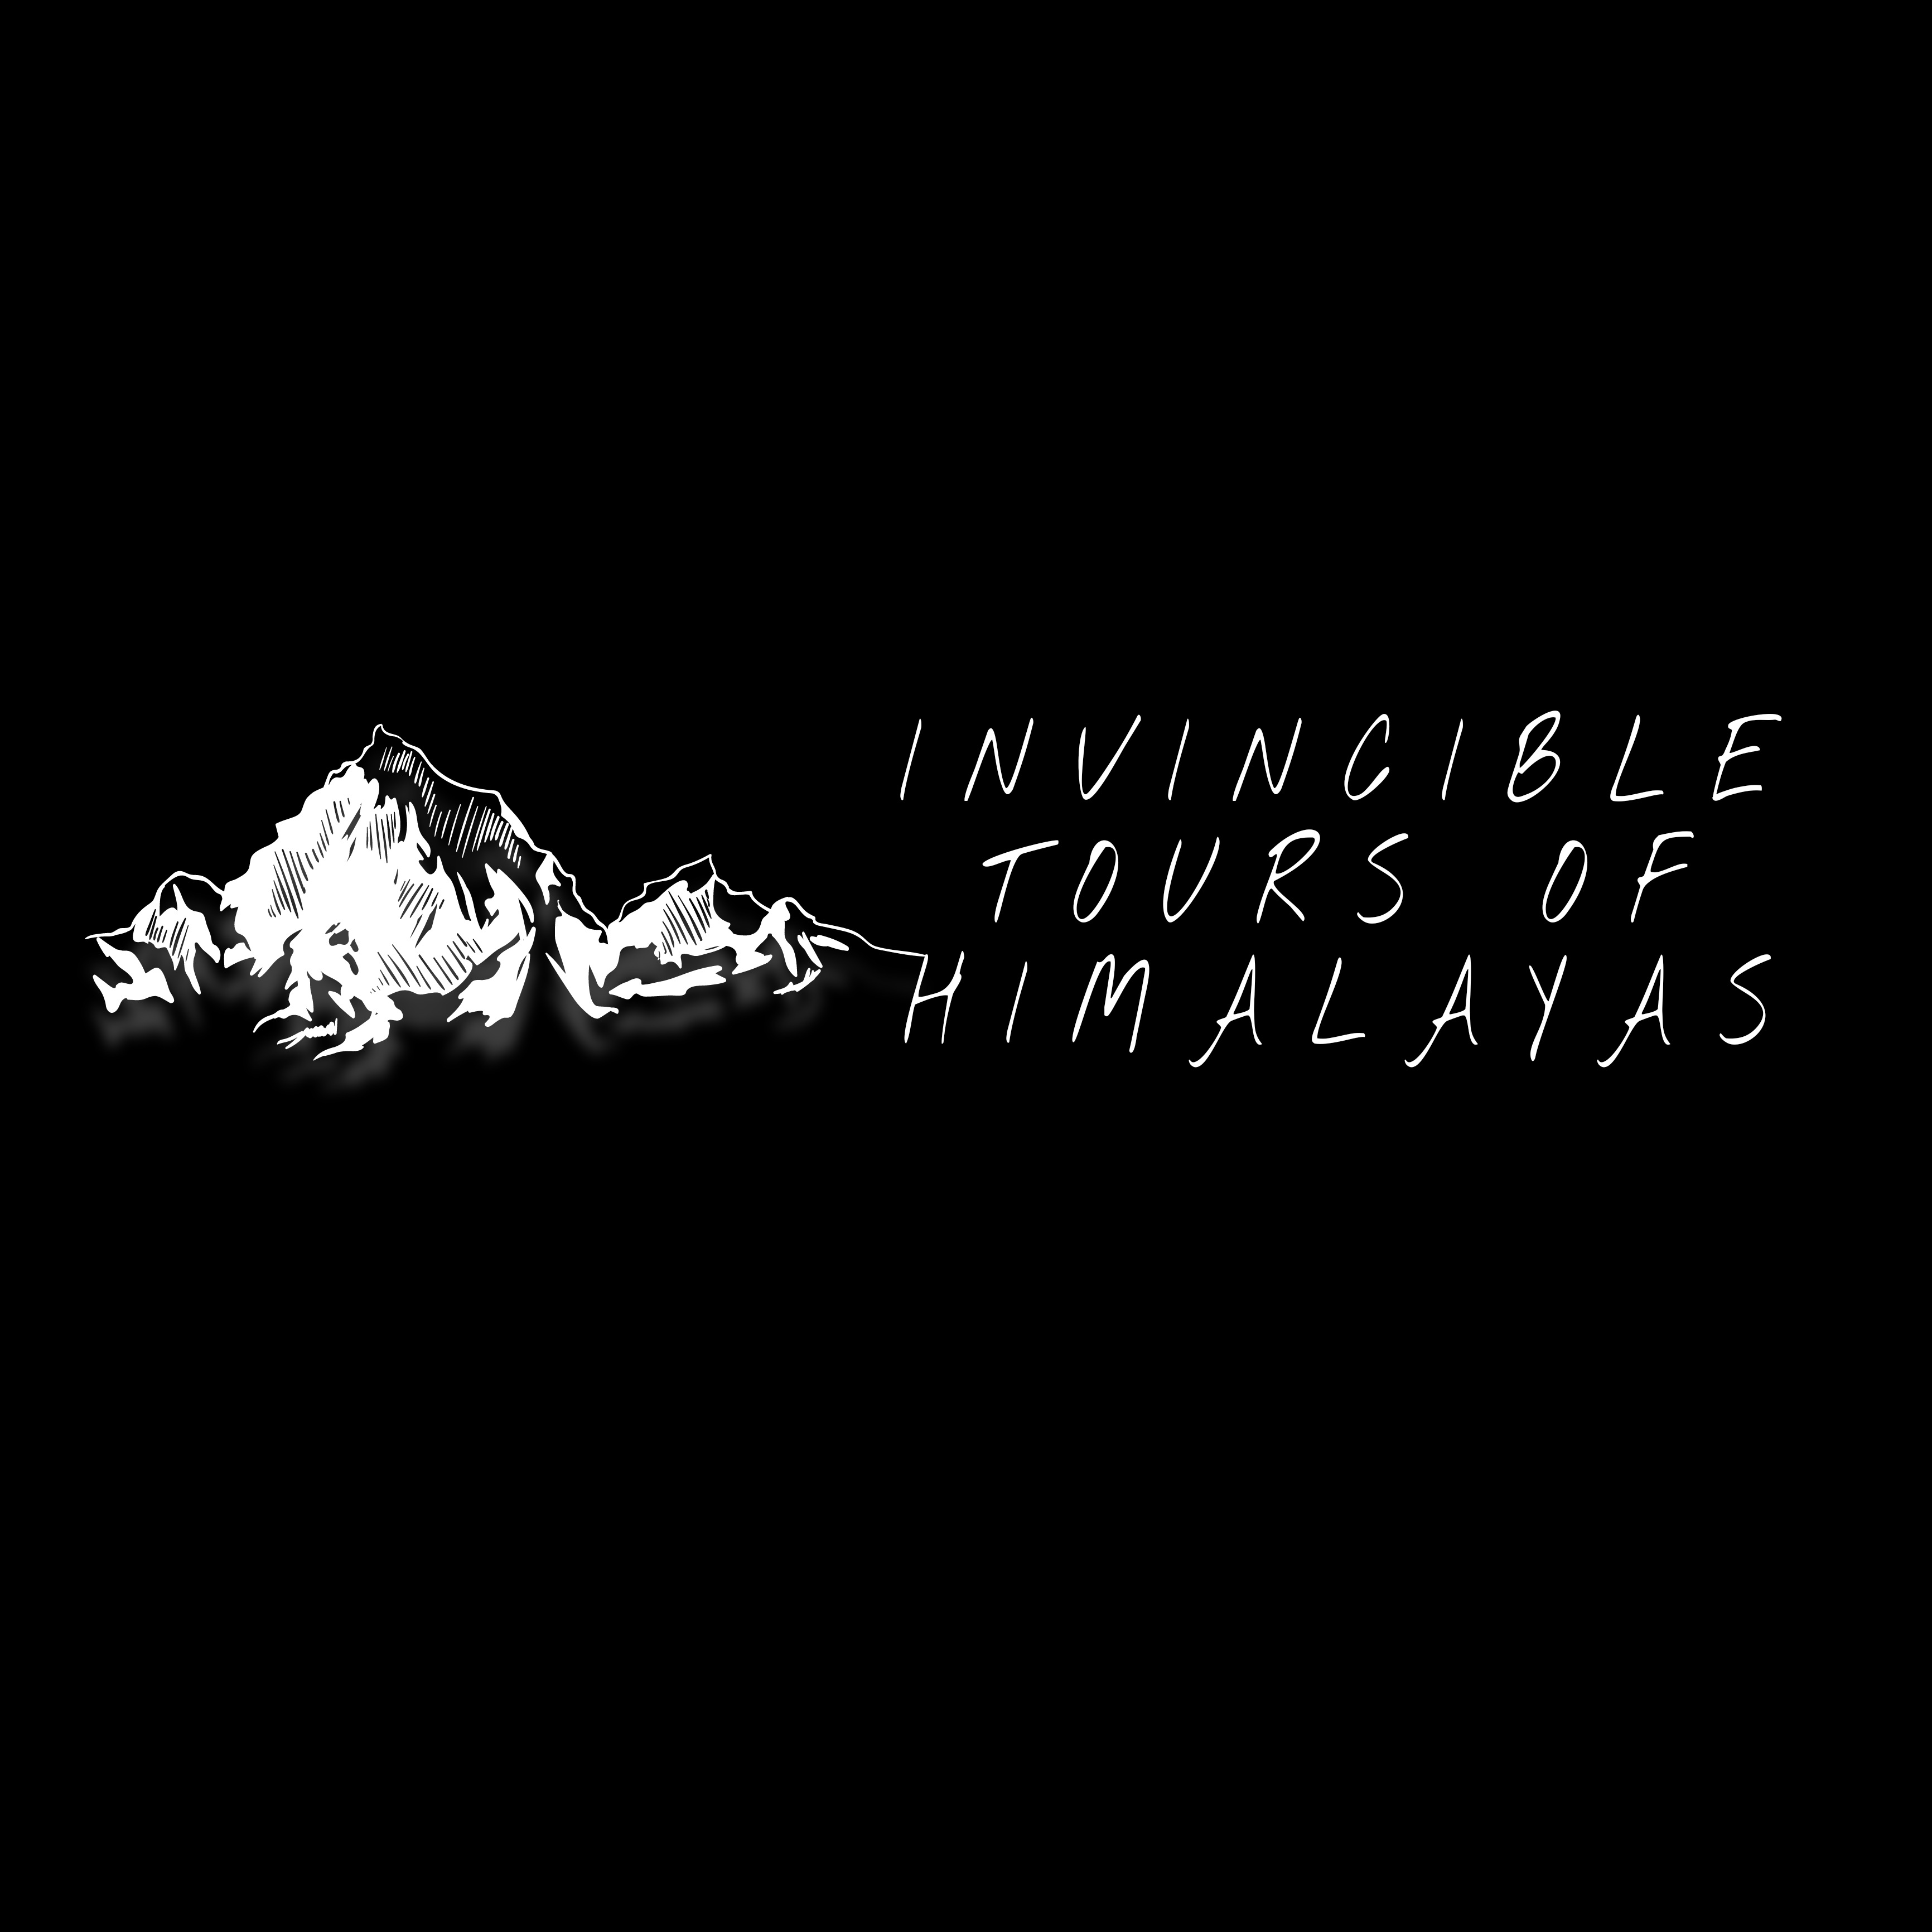 Invincible Tours Of Himalyas